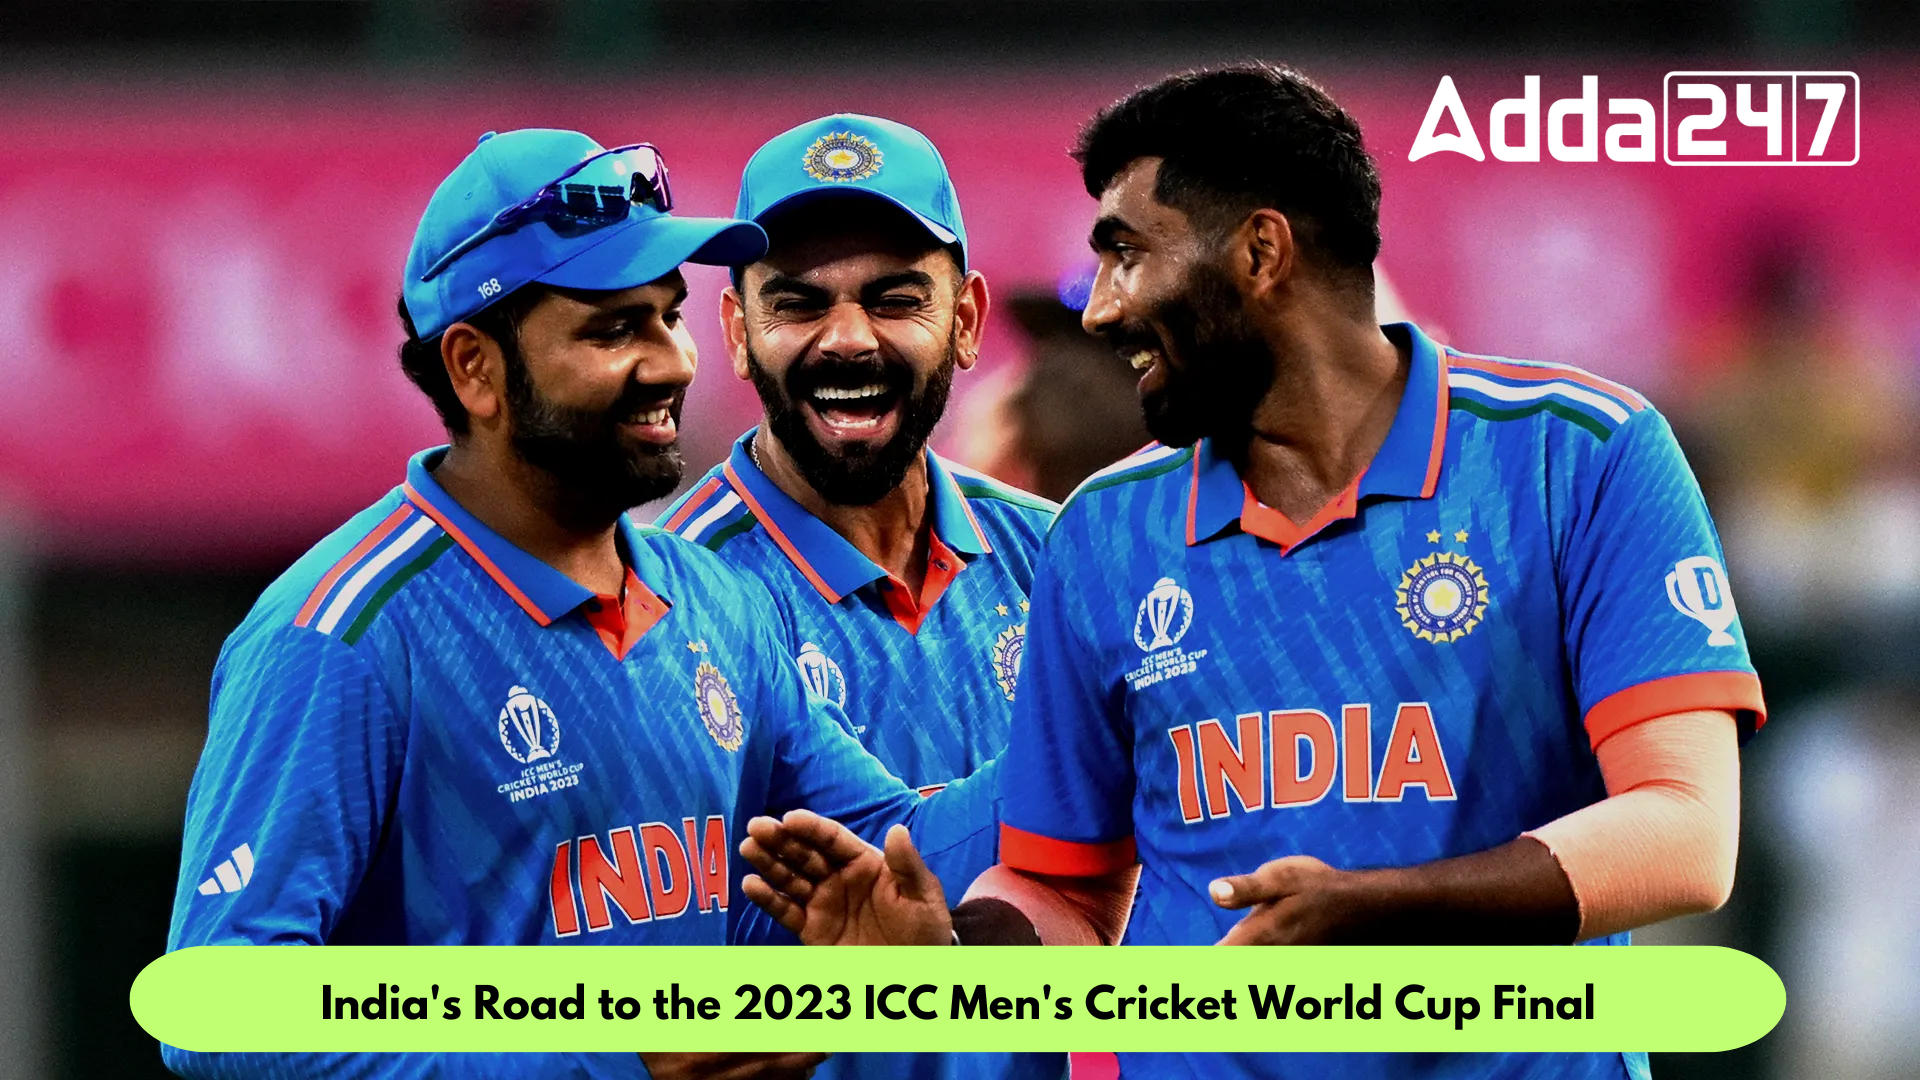 India's Road to the 2023 ICC Men's Cricket World Cup Final